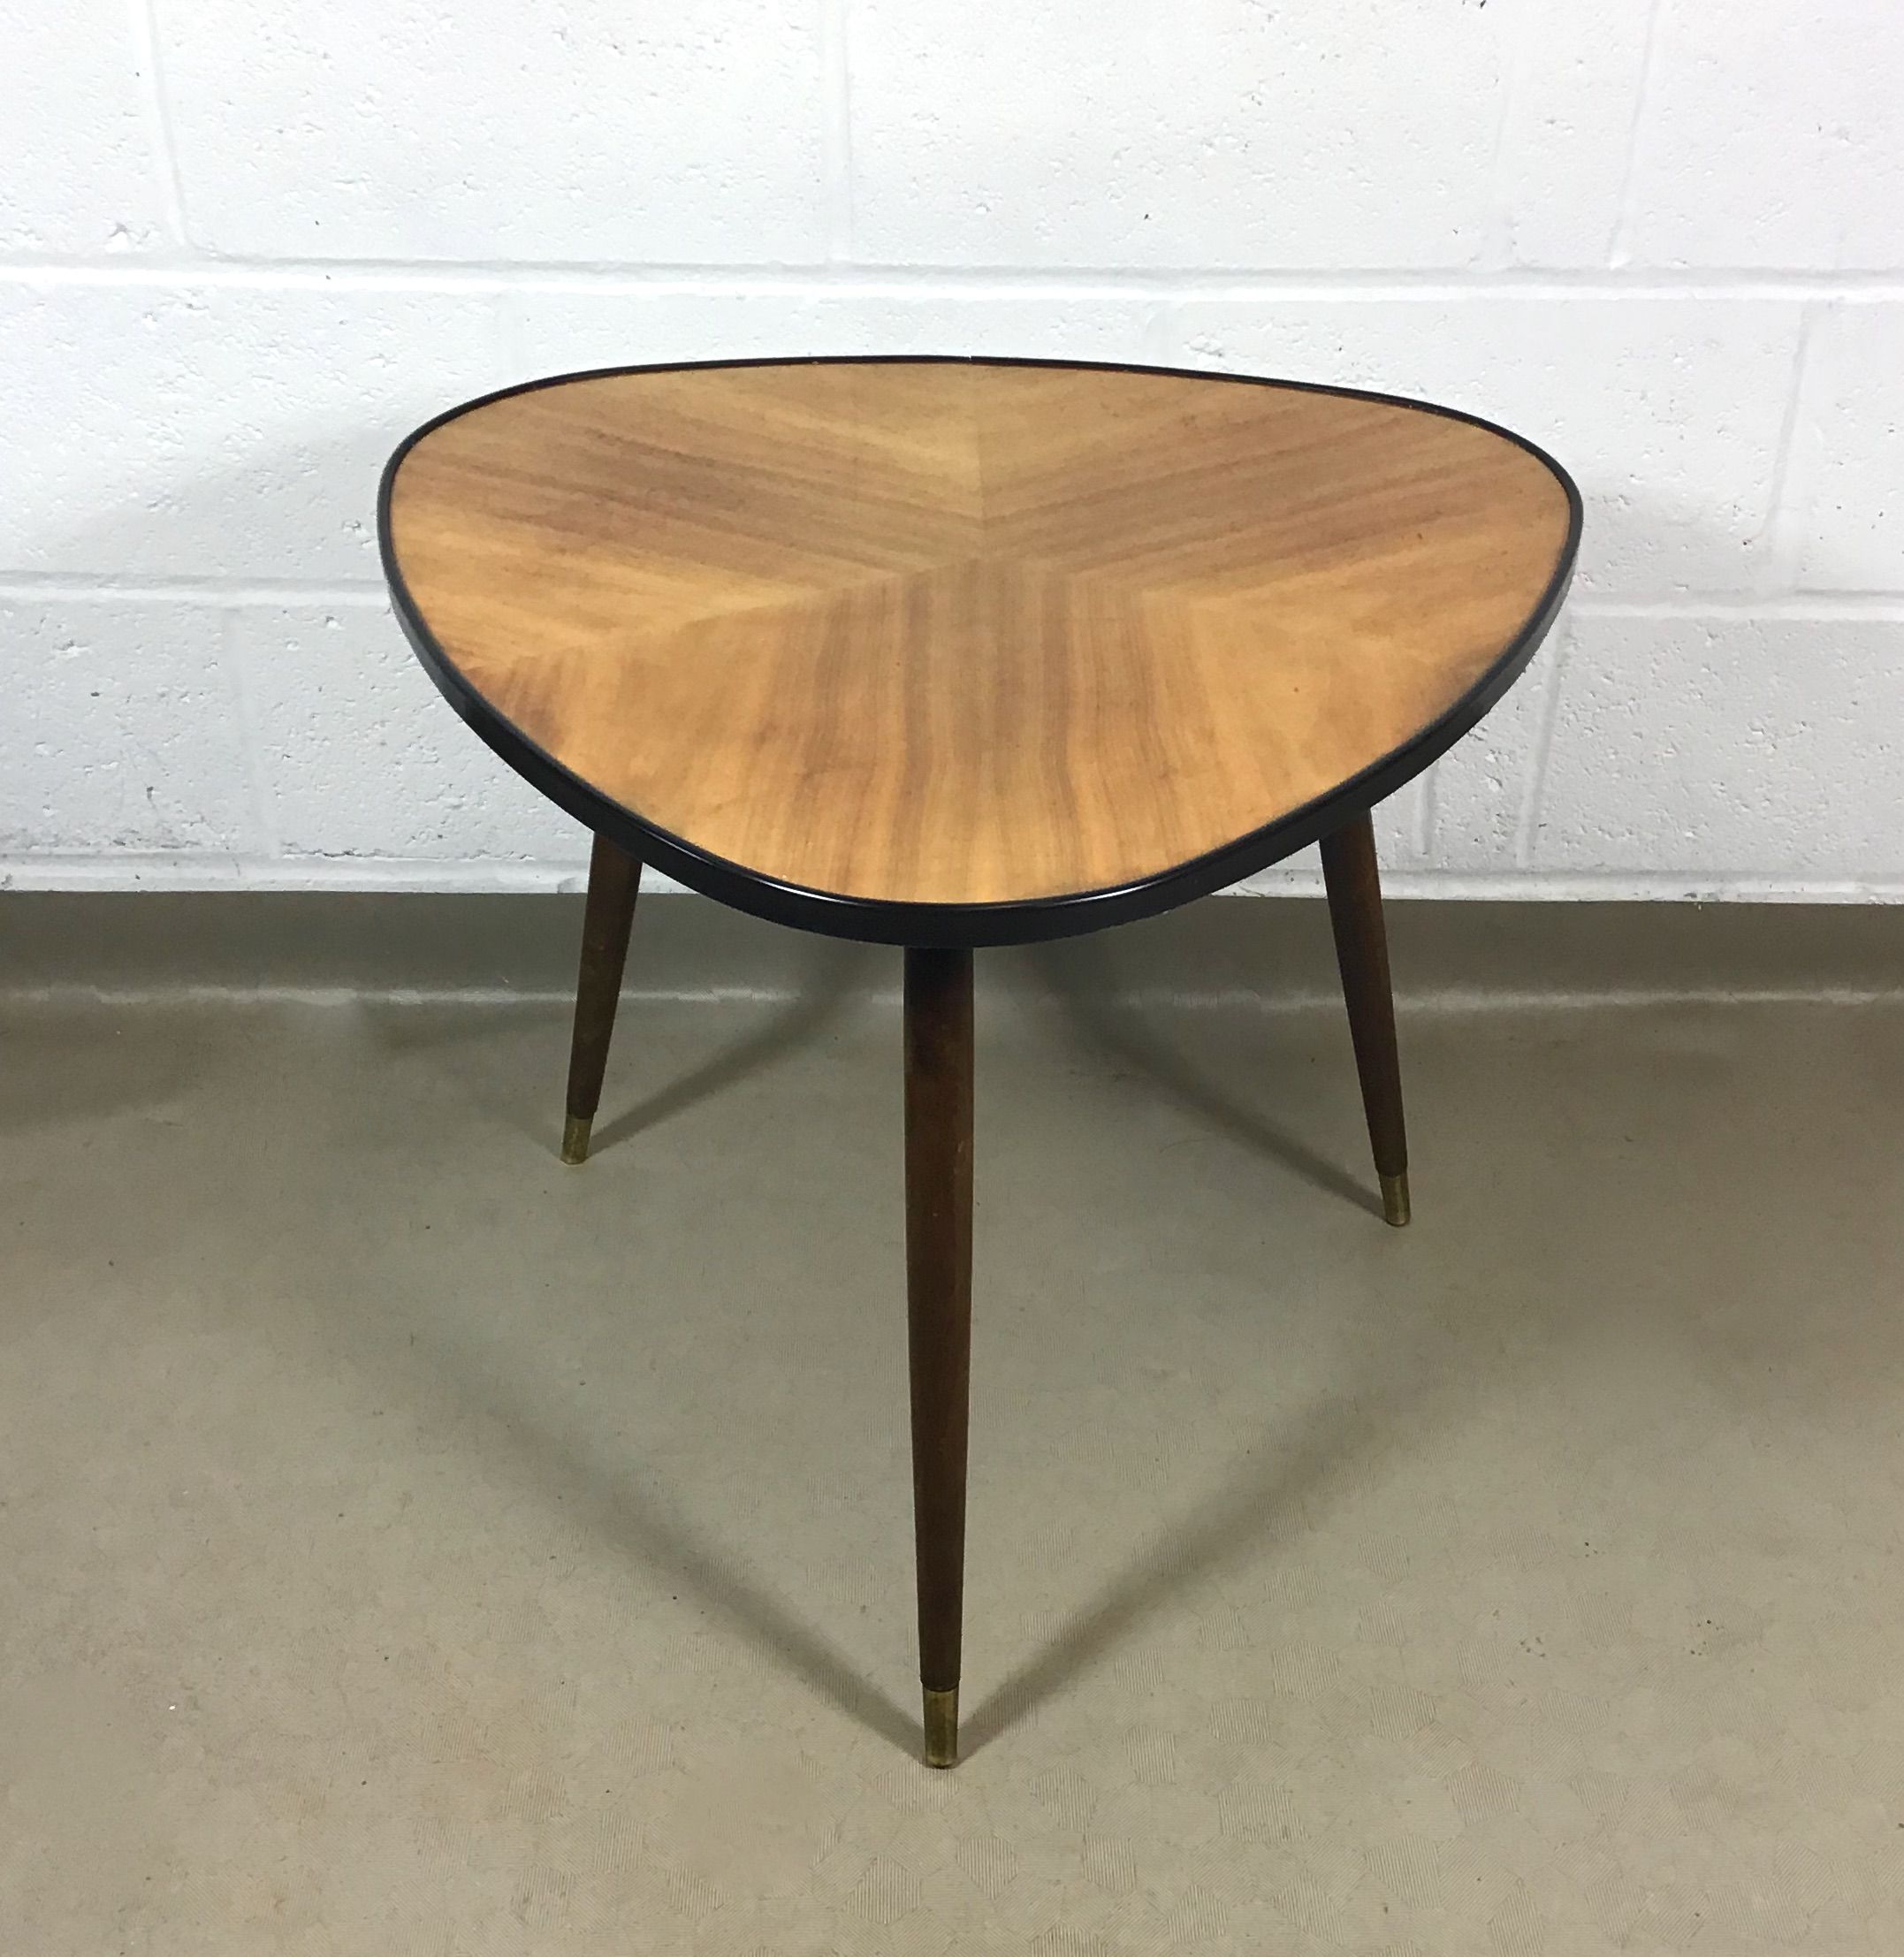 A 1950's Marquetry Topped High Lustre Triangular Occasional/sofa Table Intended For Triangular Console Tables (View 4 of 20)